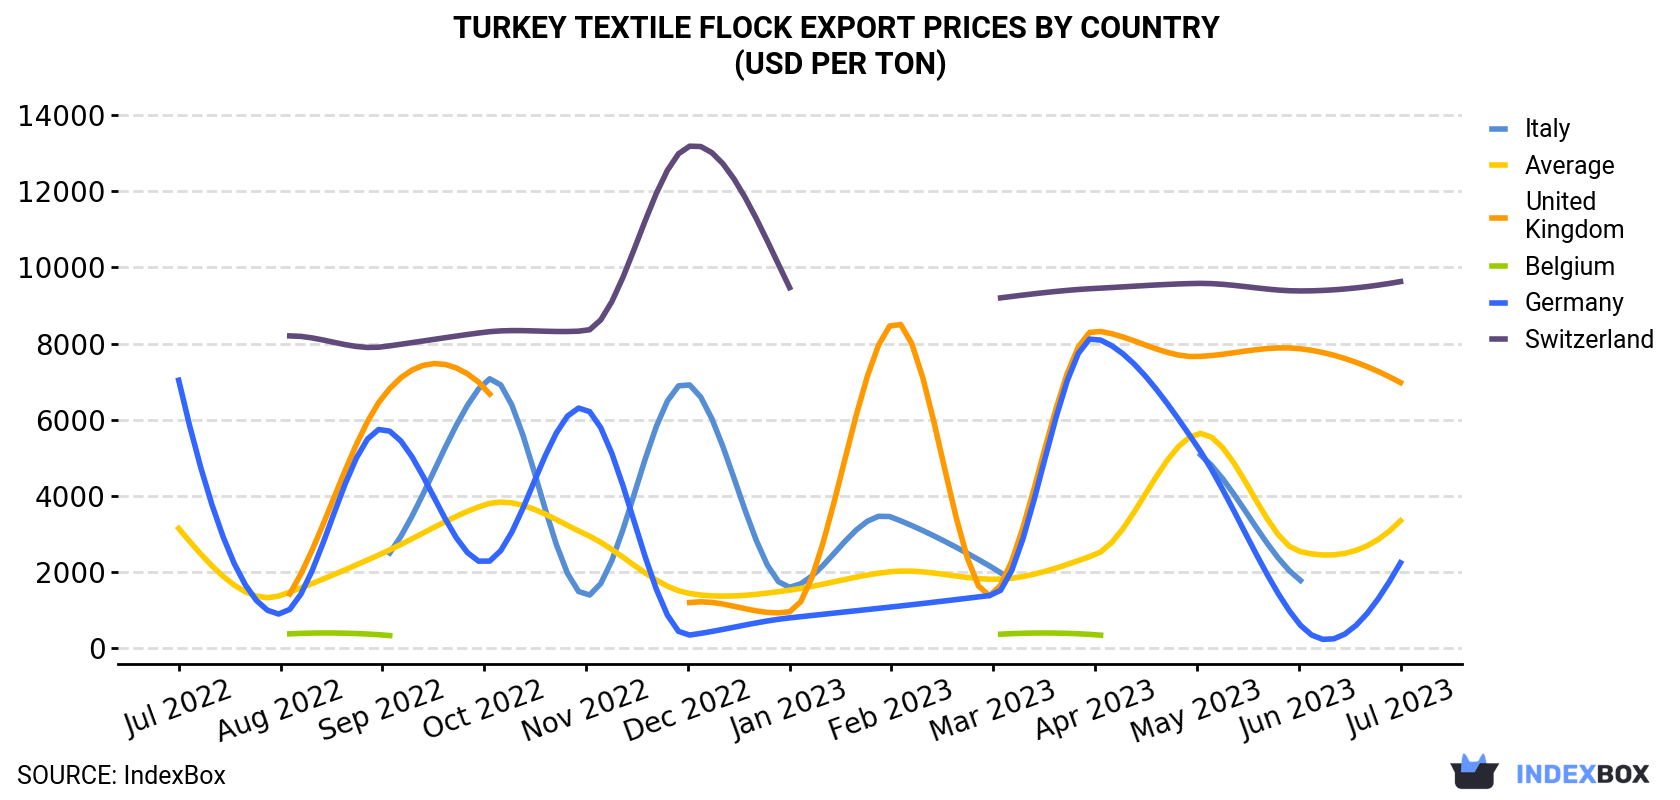 Turkey Textile Flock Export Prices By Country (USD Per Ton)